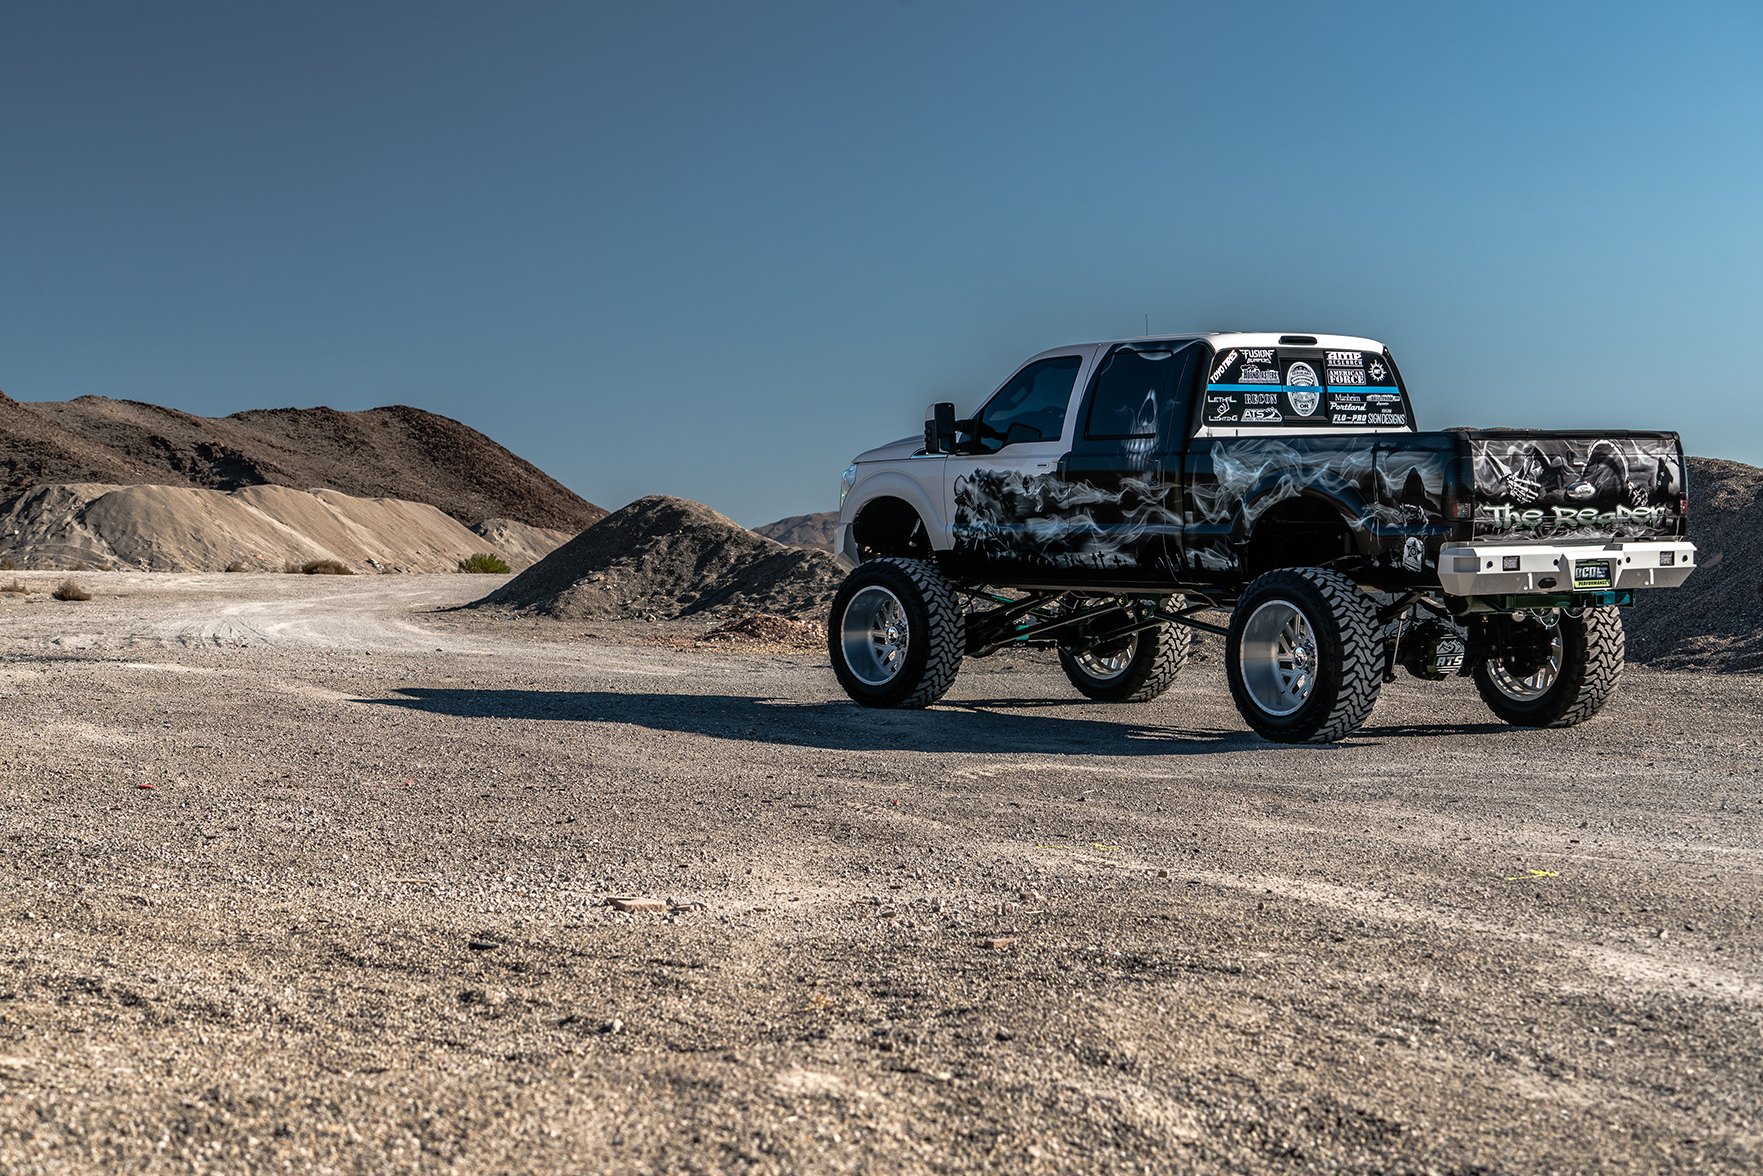 Lifted F350 With Custom Paint - Photo by American Force